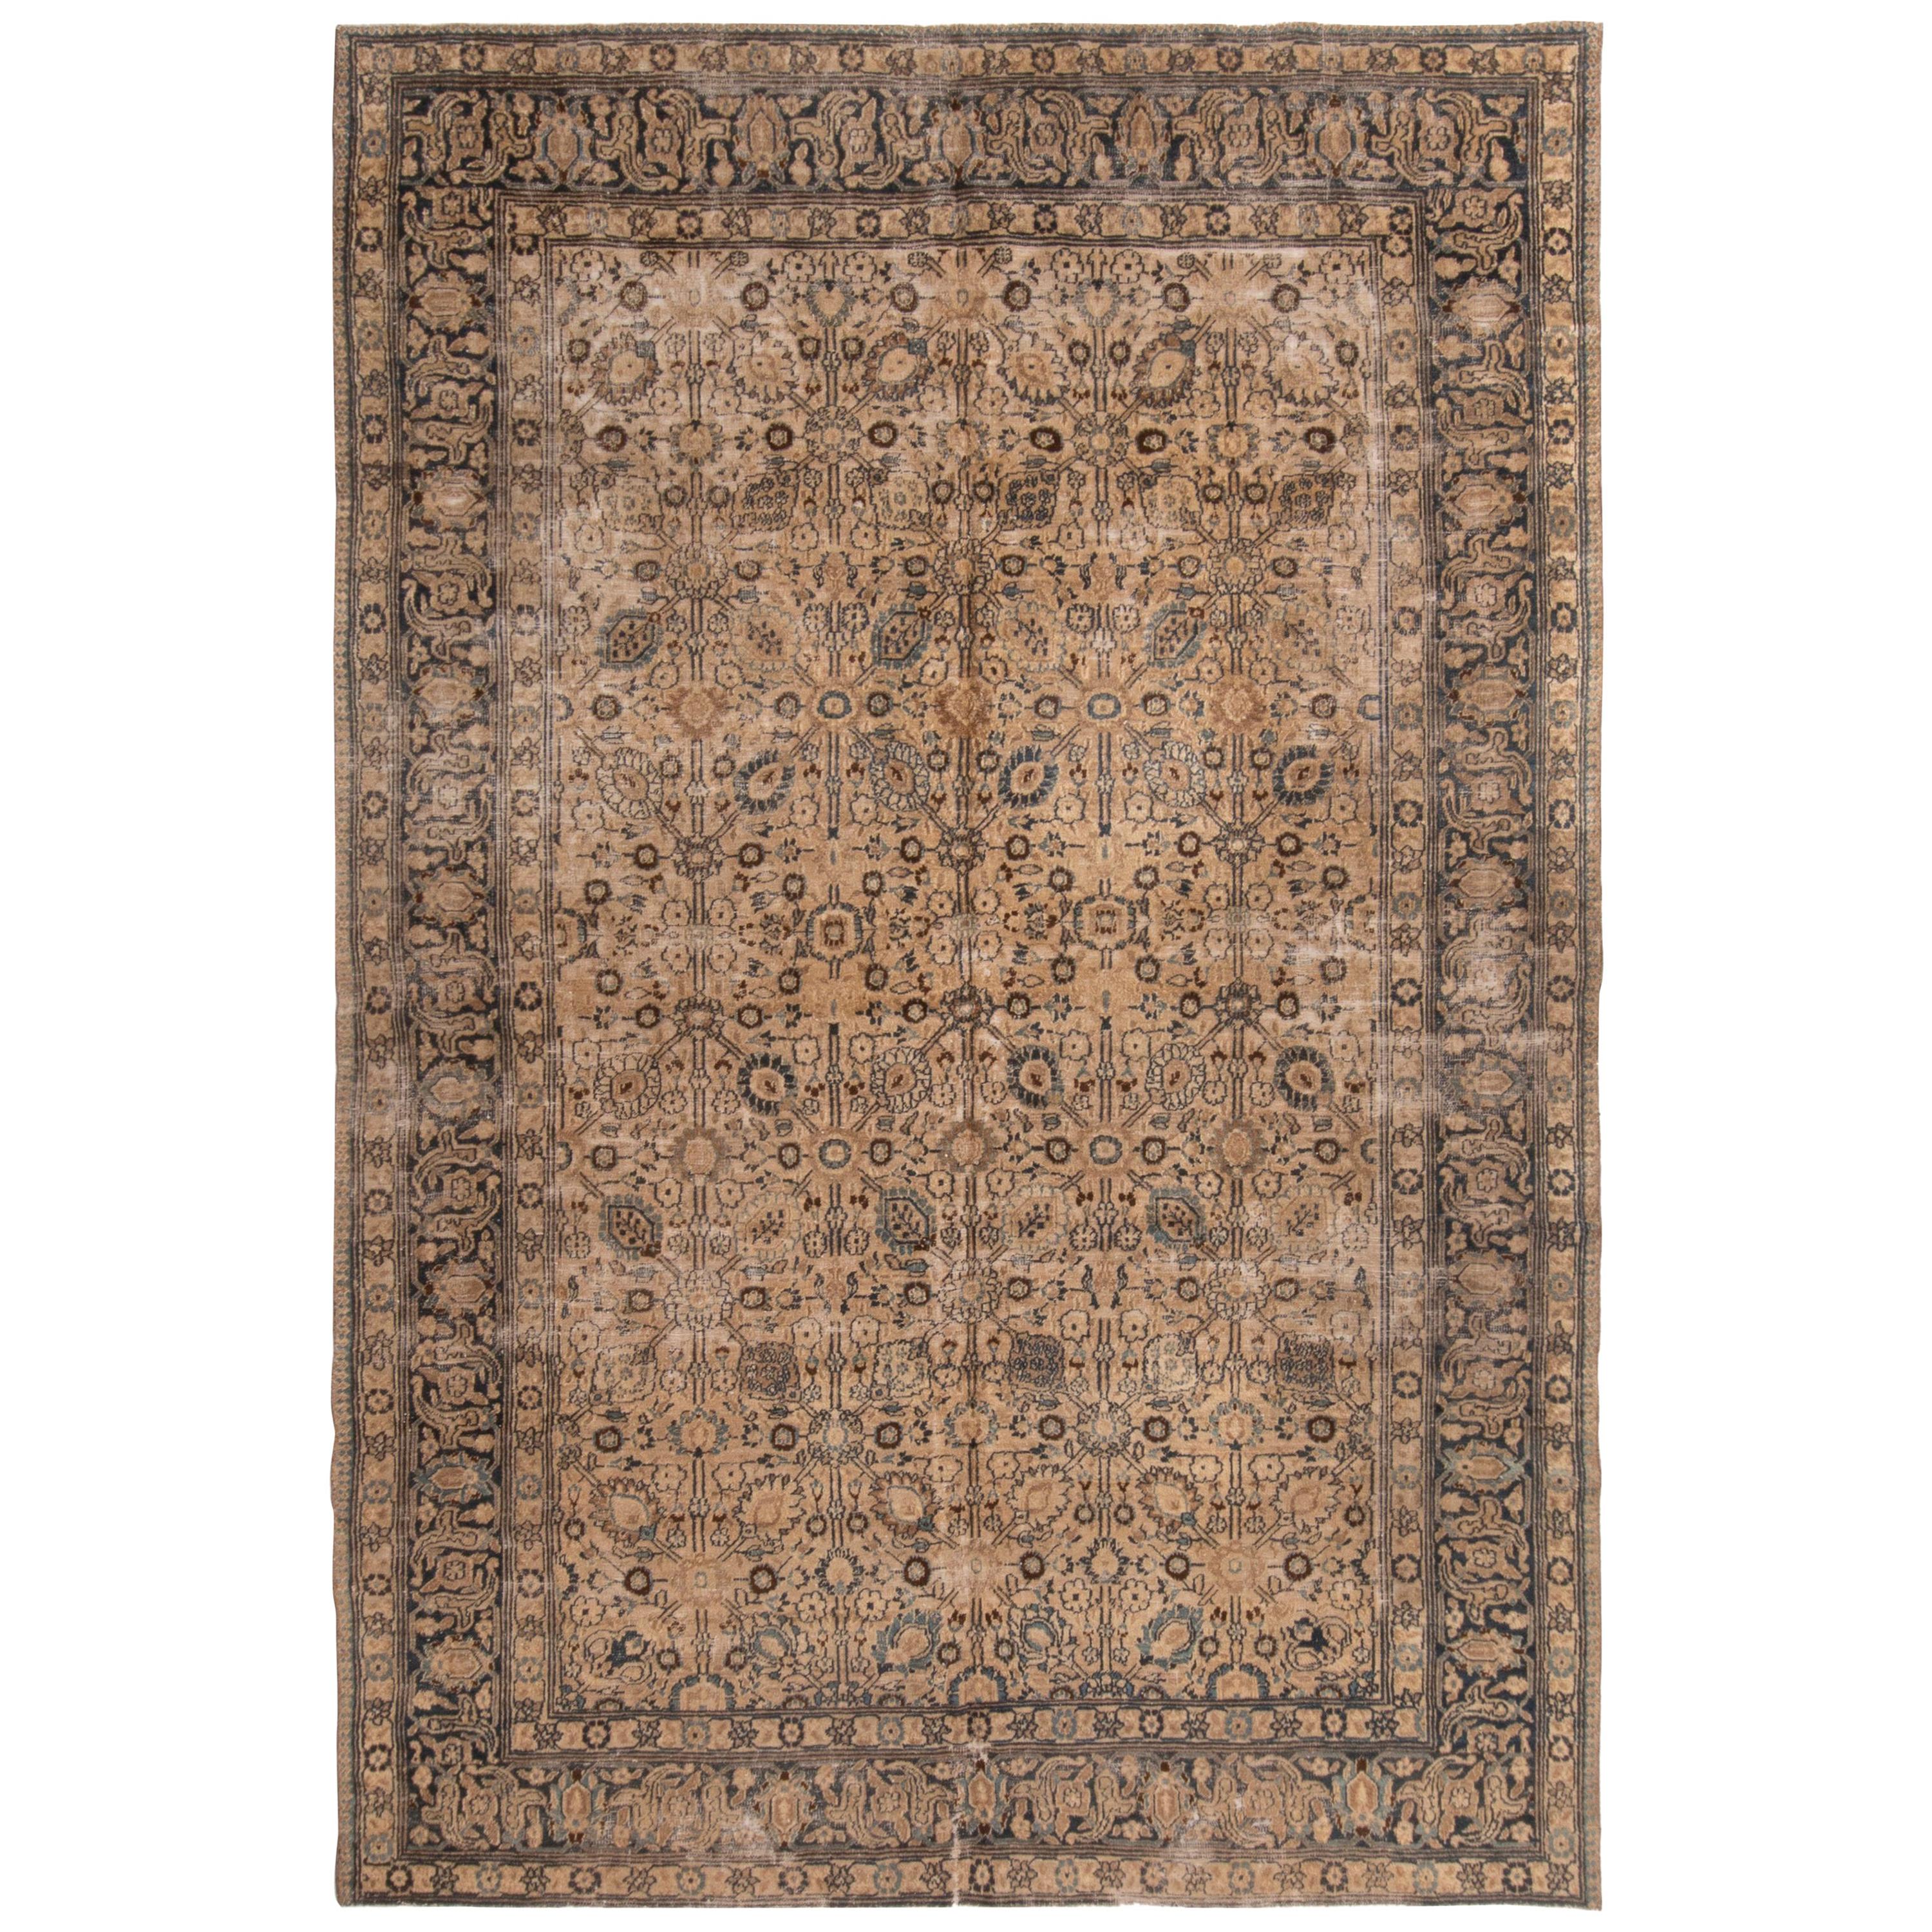 Antique Doroksh Brown and Blue Wool Rug with All-Over Floral Pattern